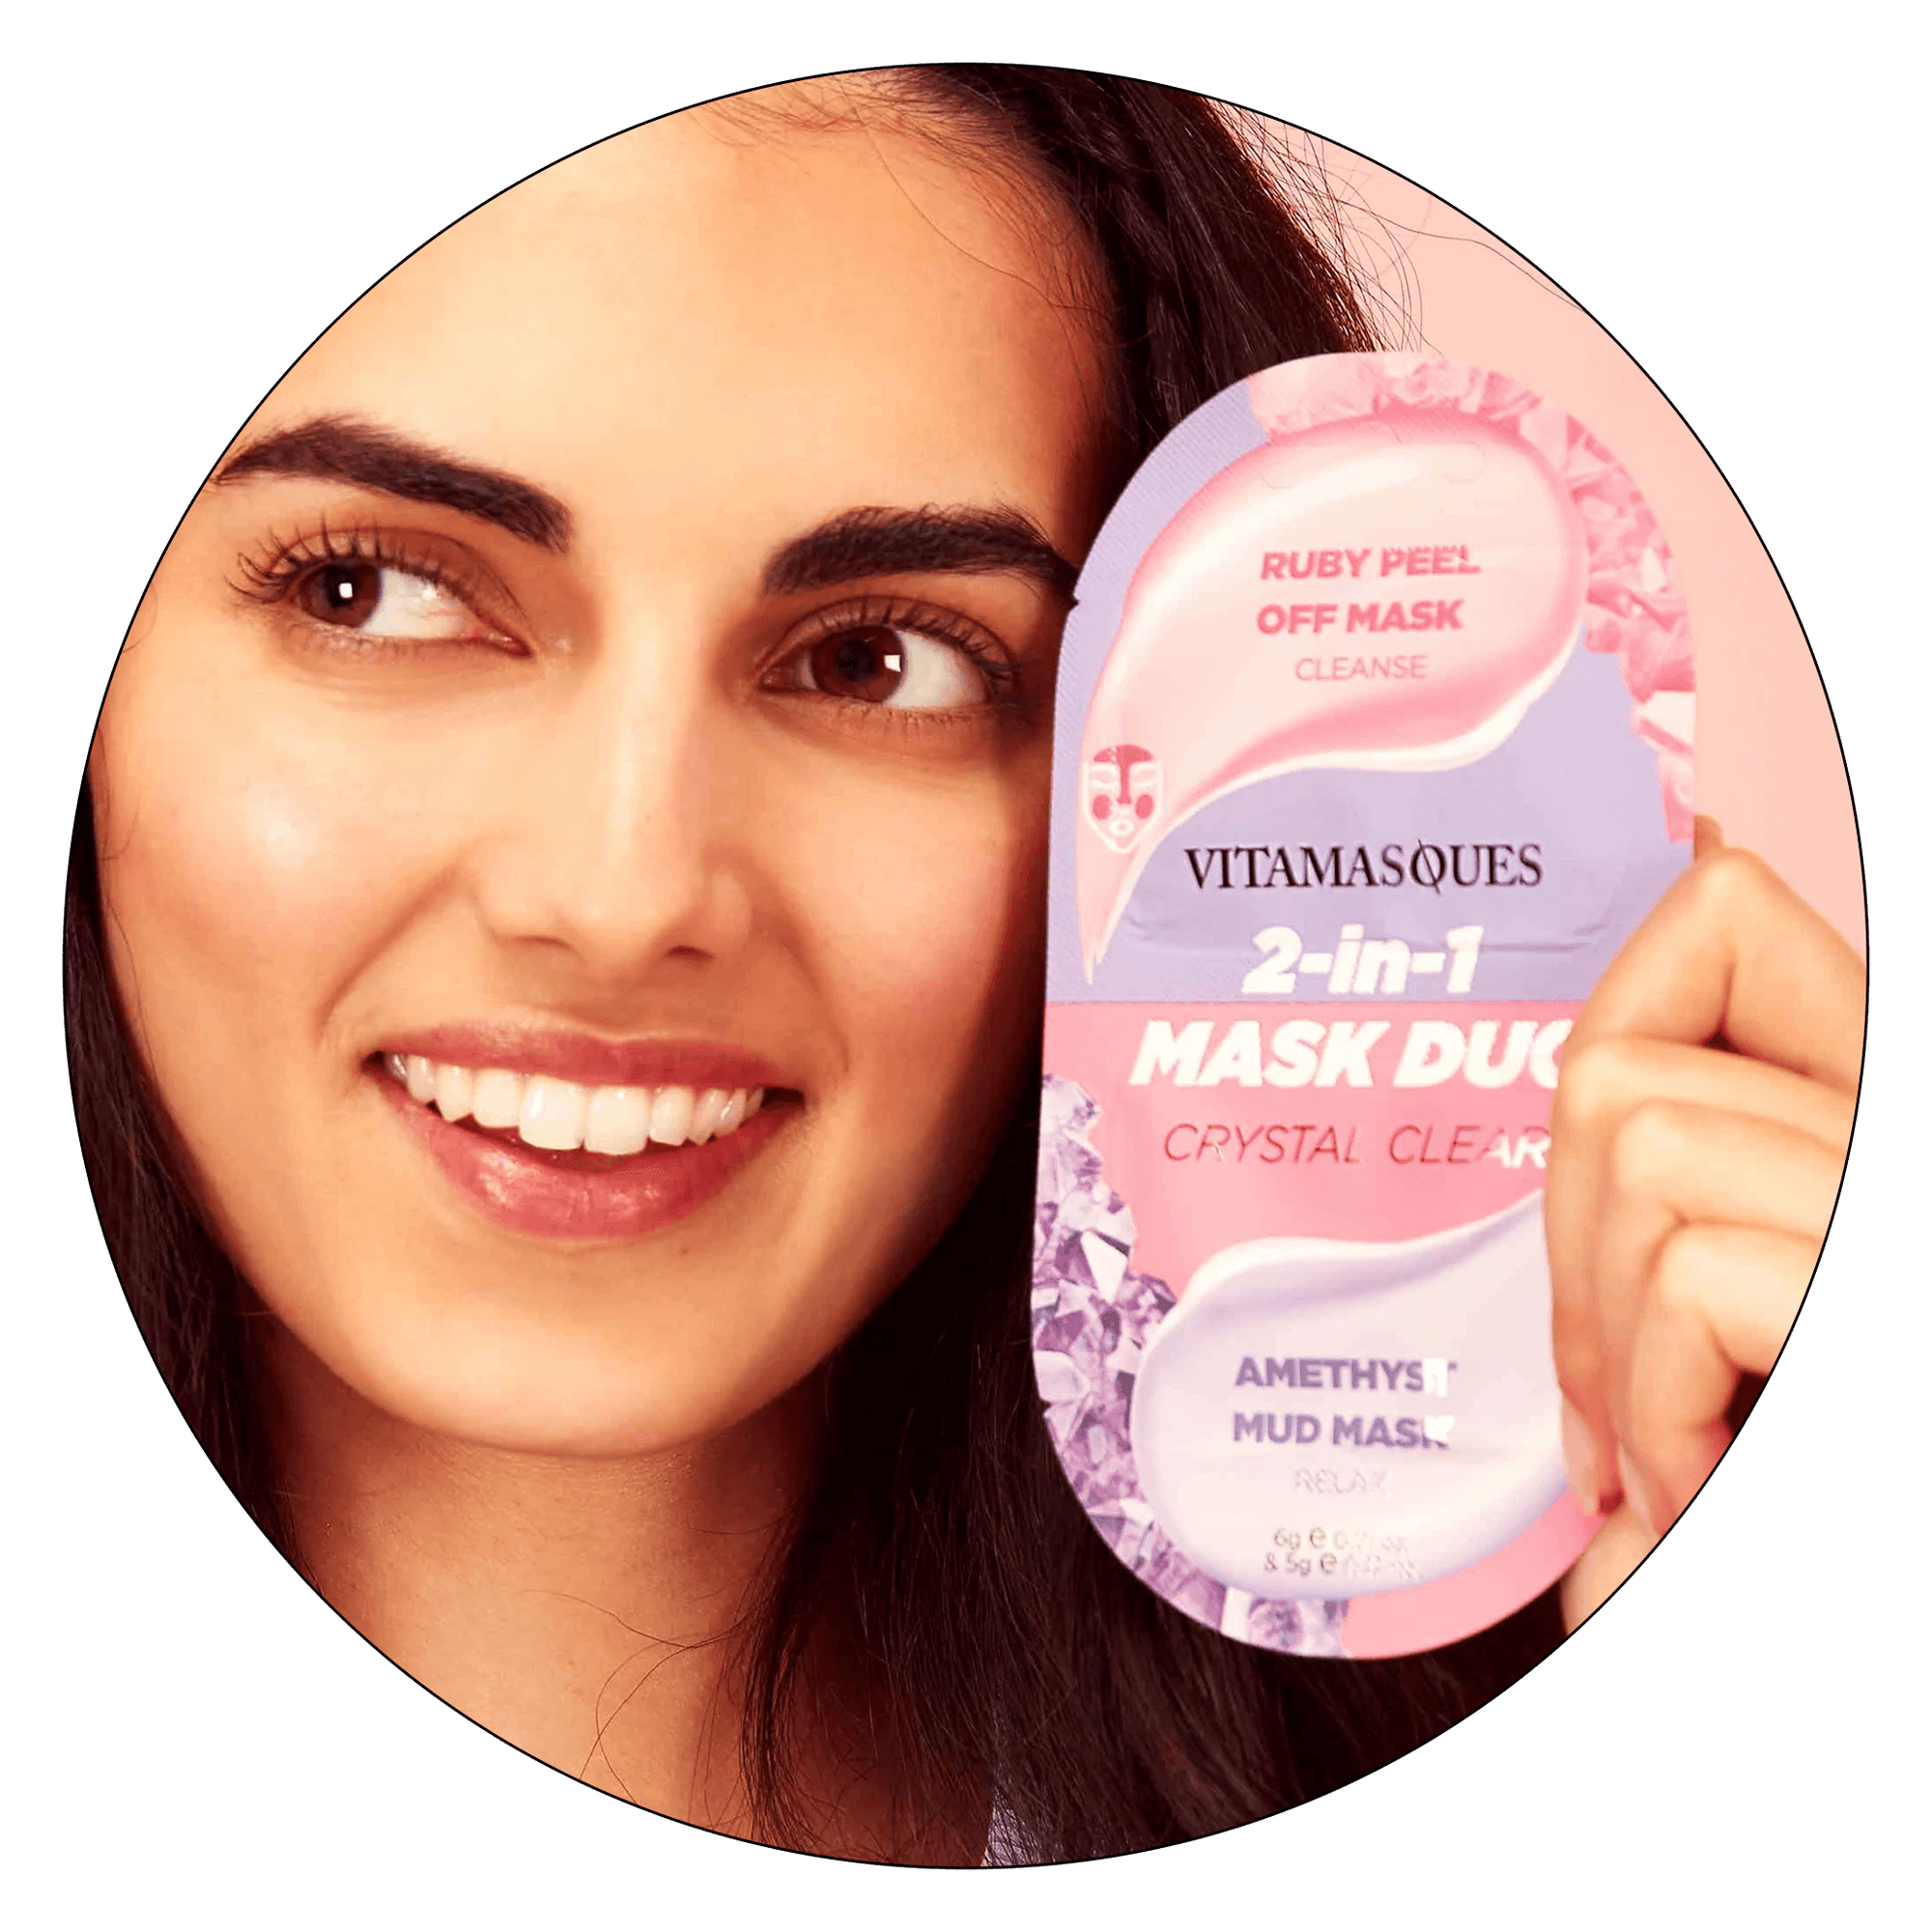 2-in-1 Mask Duo: Crystal Clear 2-in-1 Mask - Vitamasques